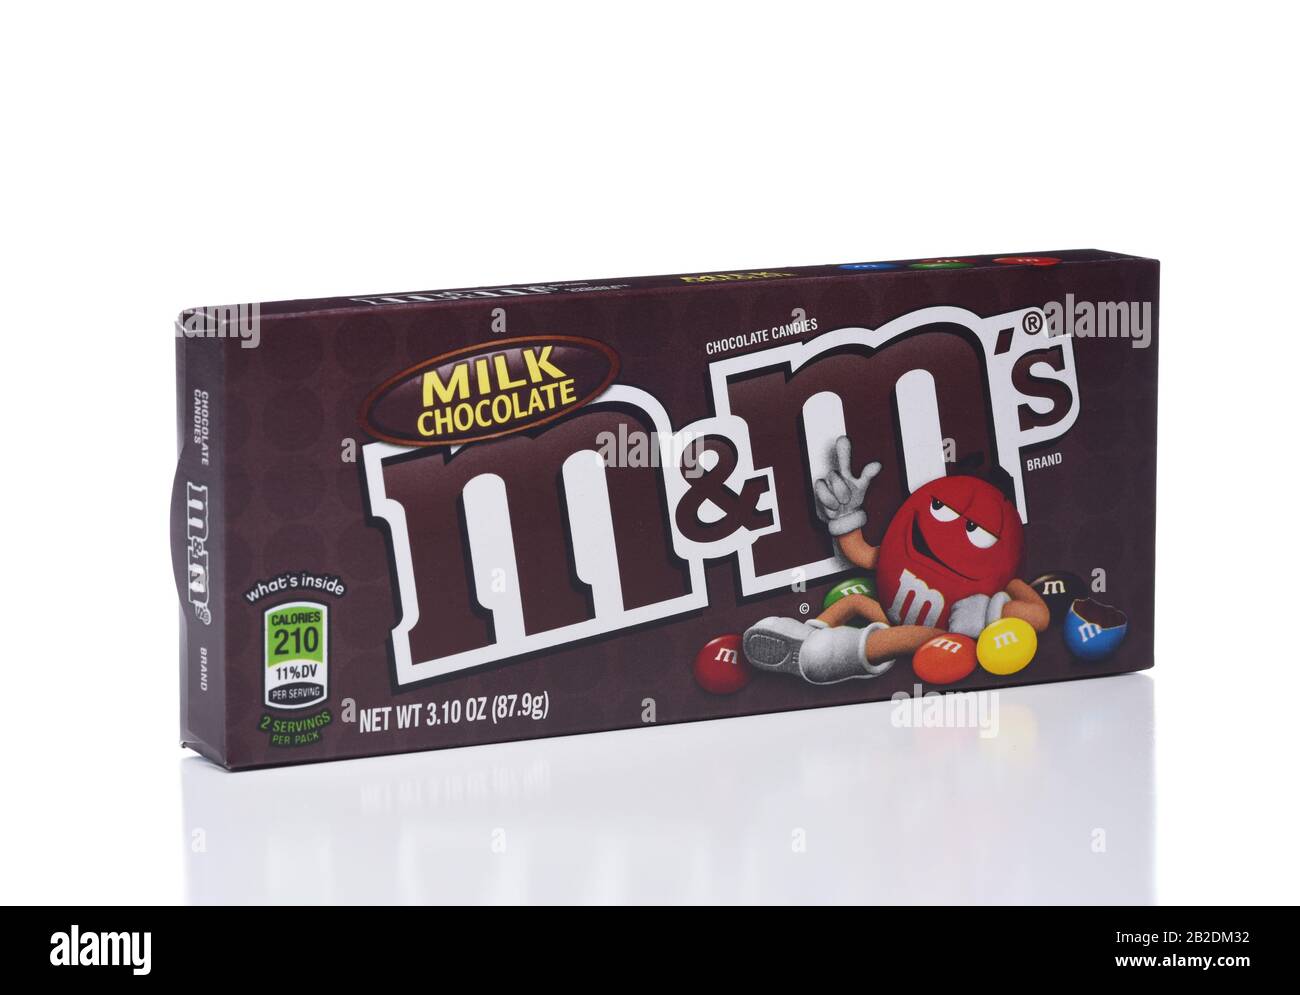 IRVINE, CALIFORNIA - JANUARY 5, 2018: M and Ms Milk Chocolate. Two boxes of the popular candy coated choclate confection. Stock Photo